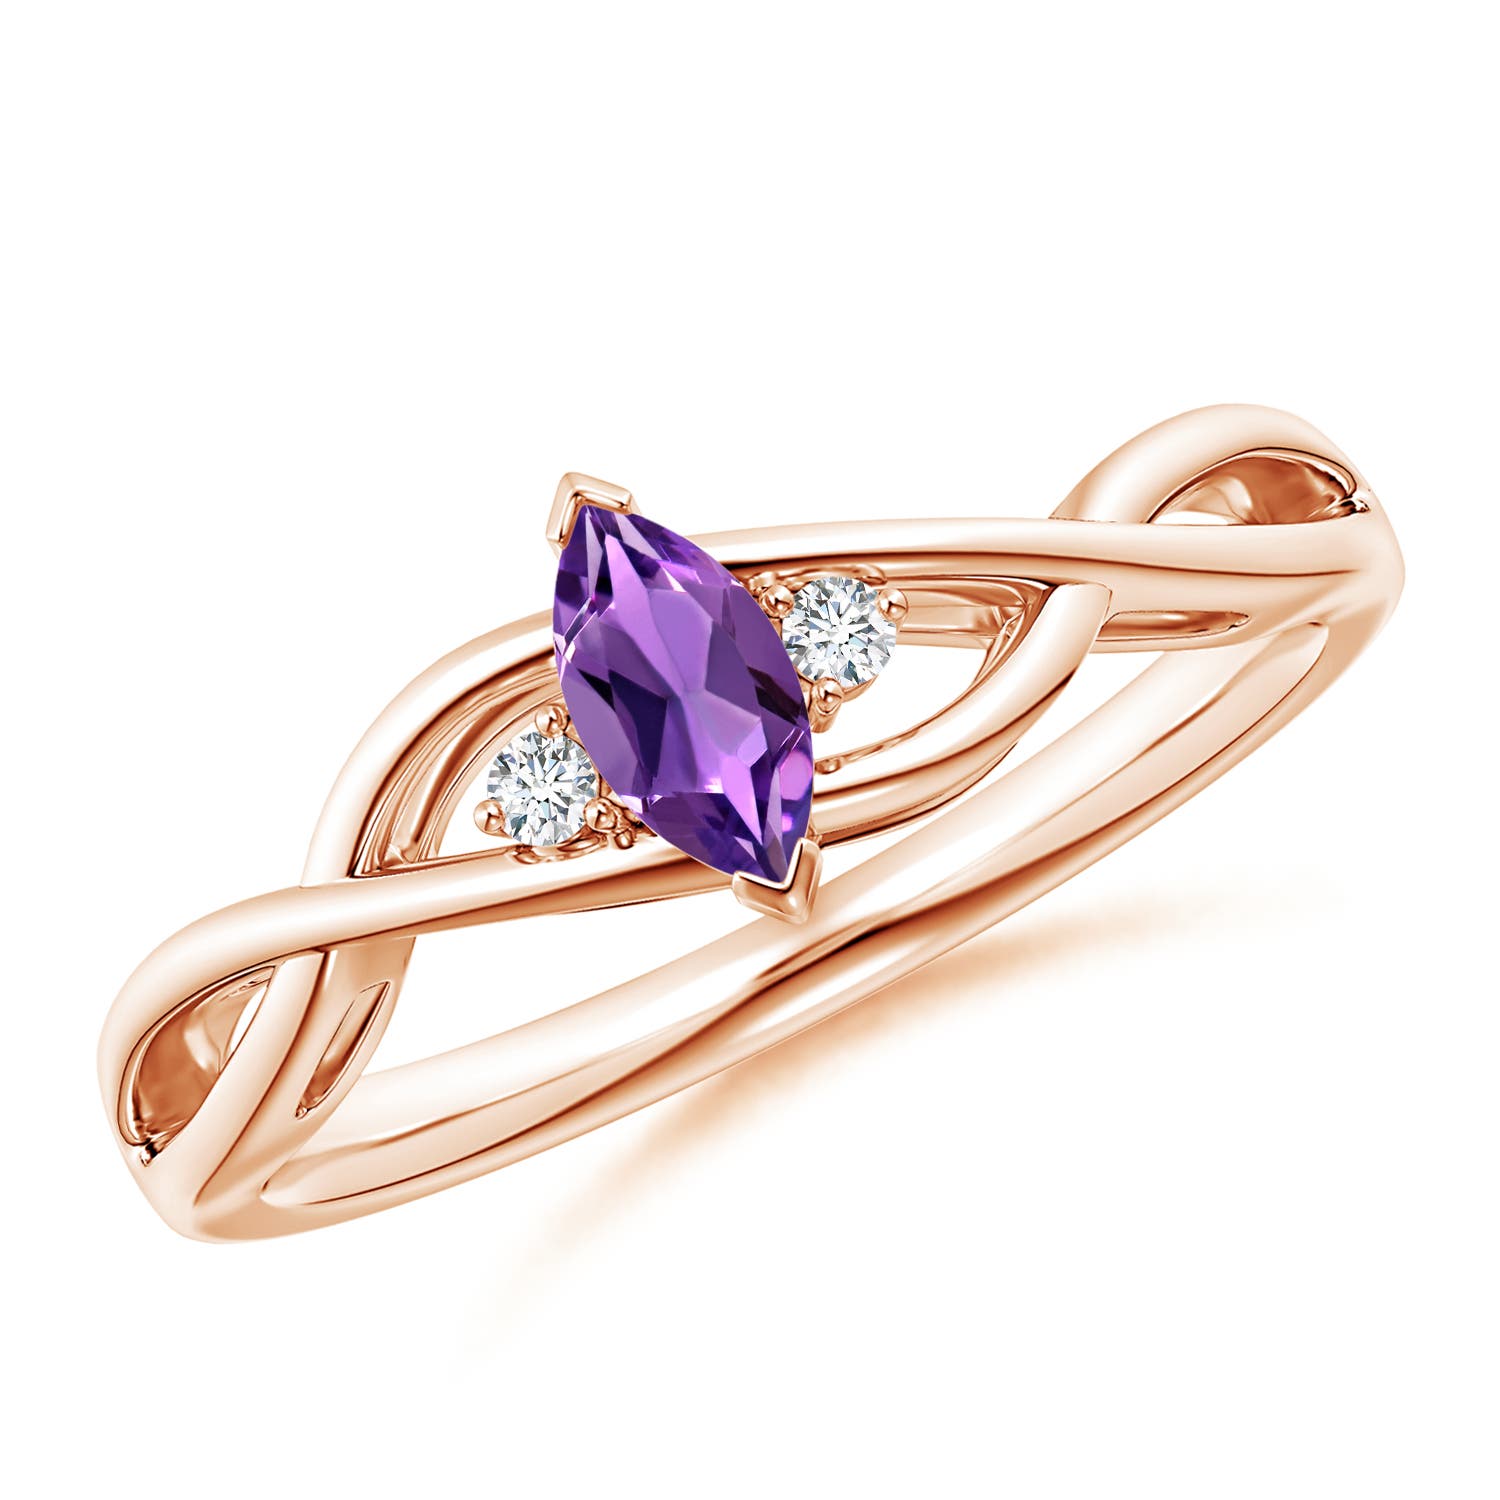 AAA - Amethyst / 0.23 CT / 14 KT Rose Gold